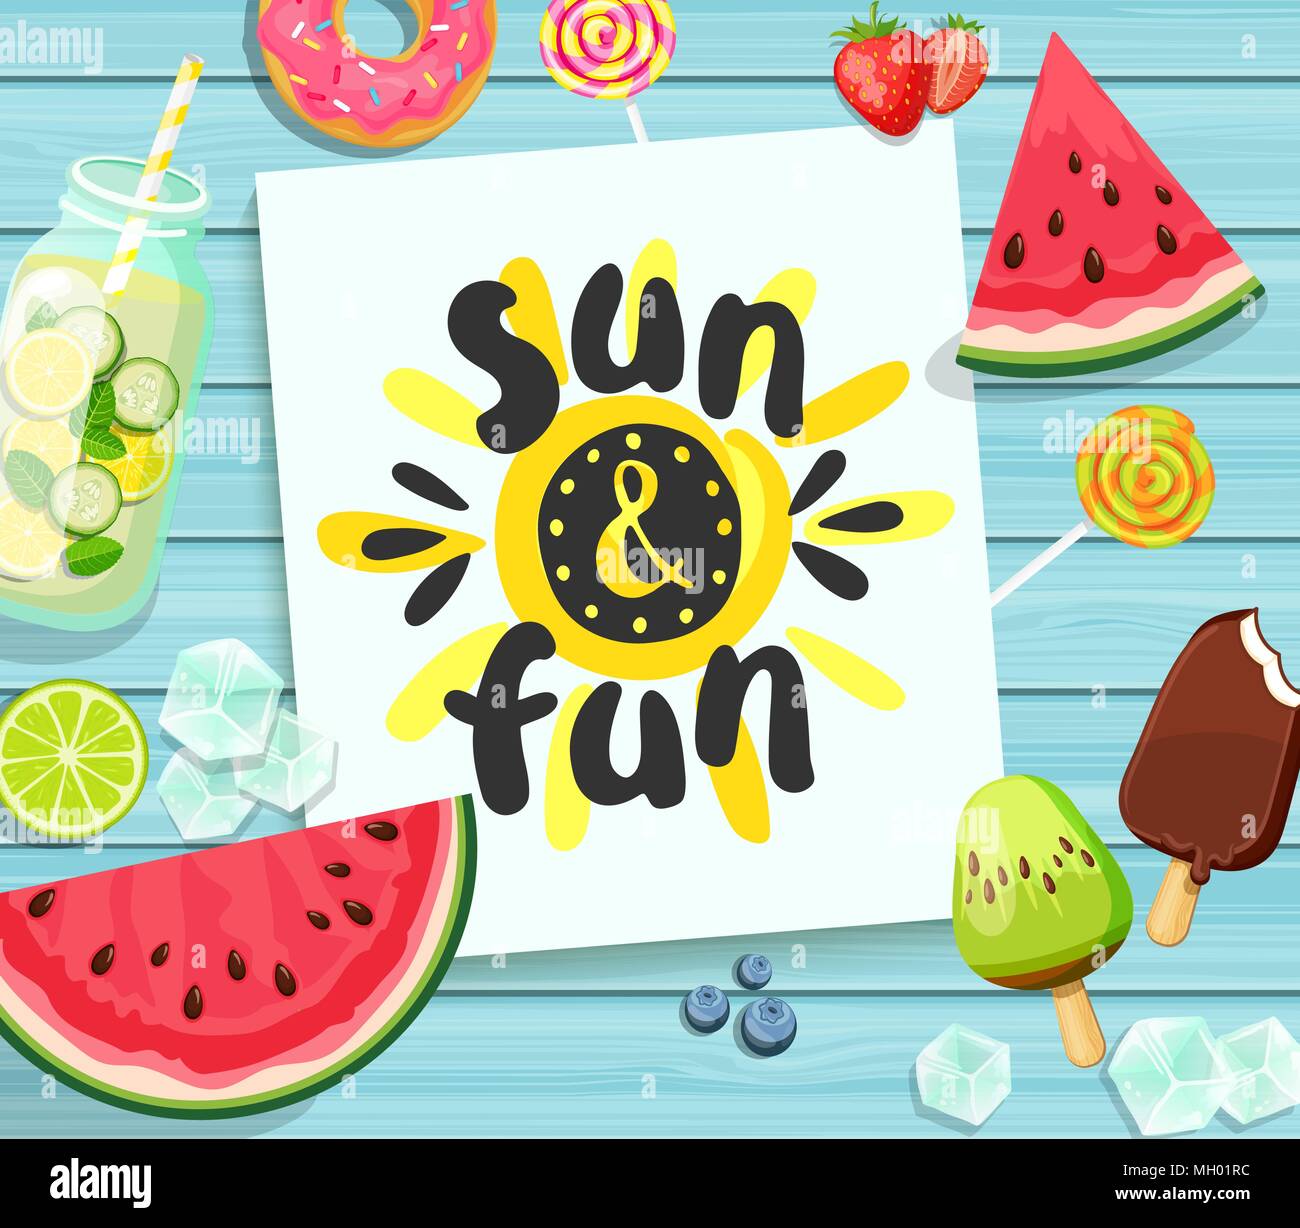 Sun and Fun card on blue wooden background with watermelon, detox, ice, donut, ice cream, lime and candy. Vector Illustration. Stock Vector